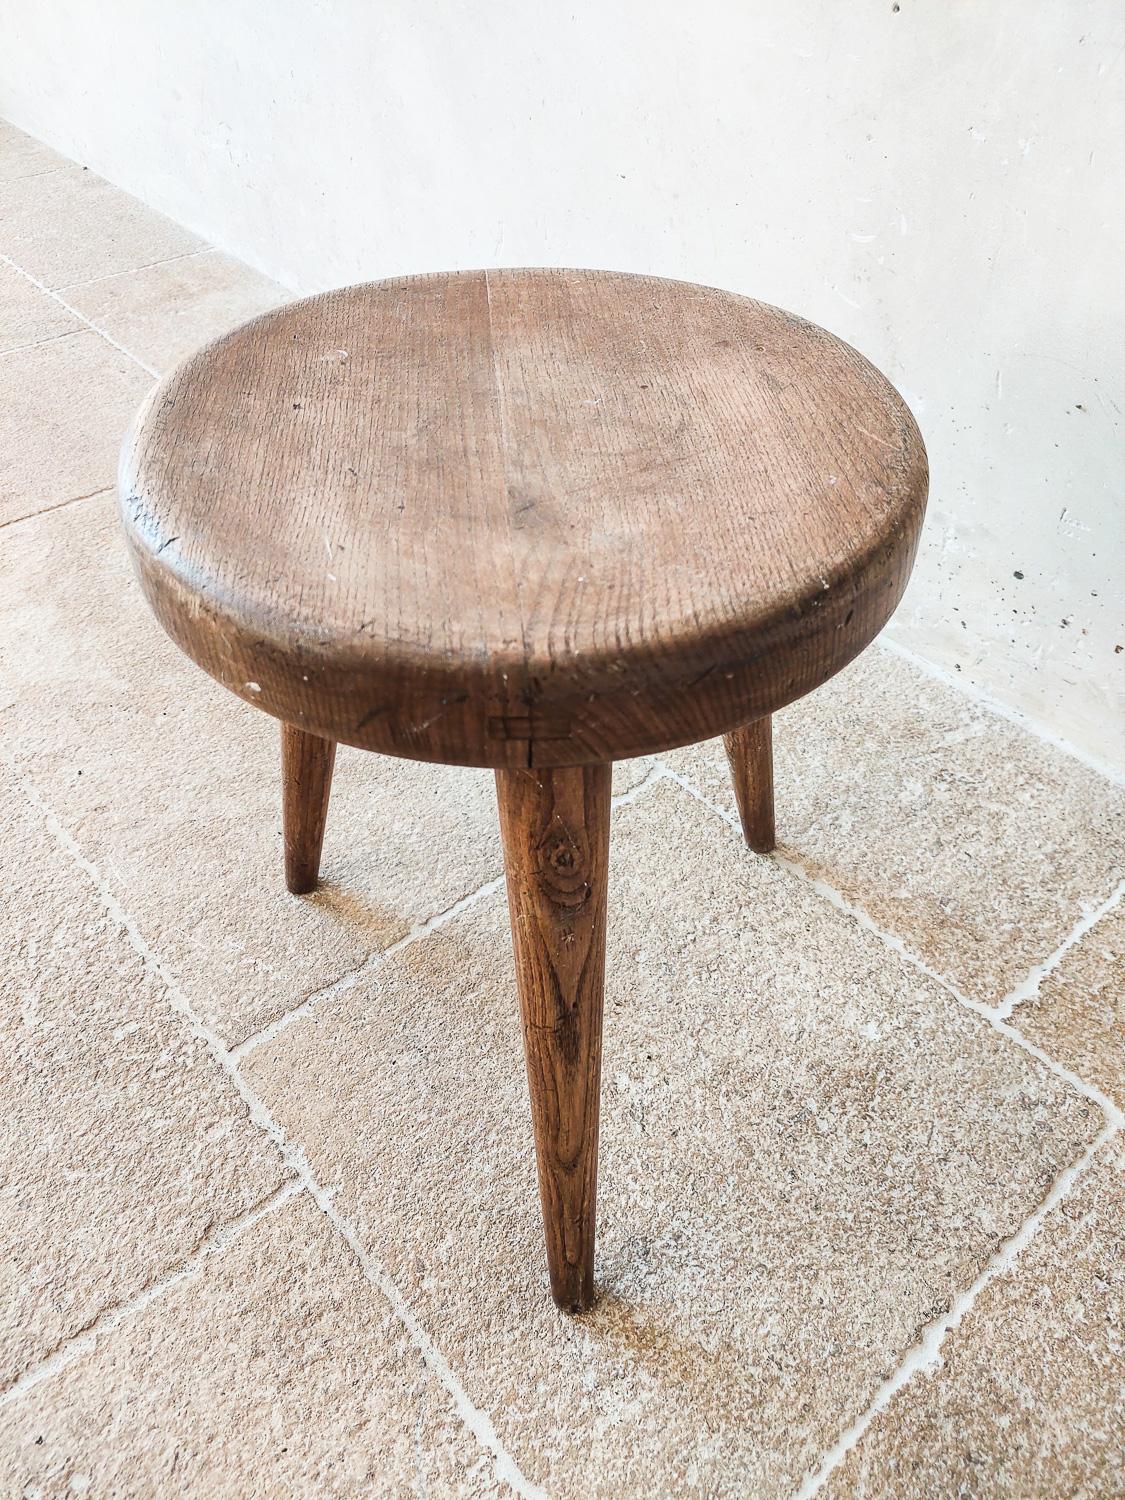 Charlotte Perriand Wooden Berger Stool, circa 1950 For Sale 7